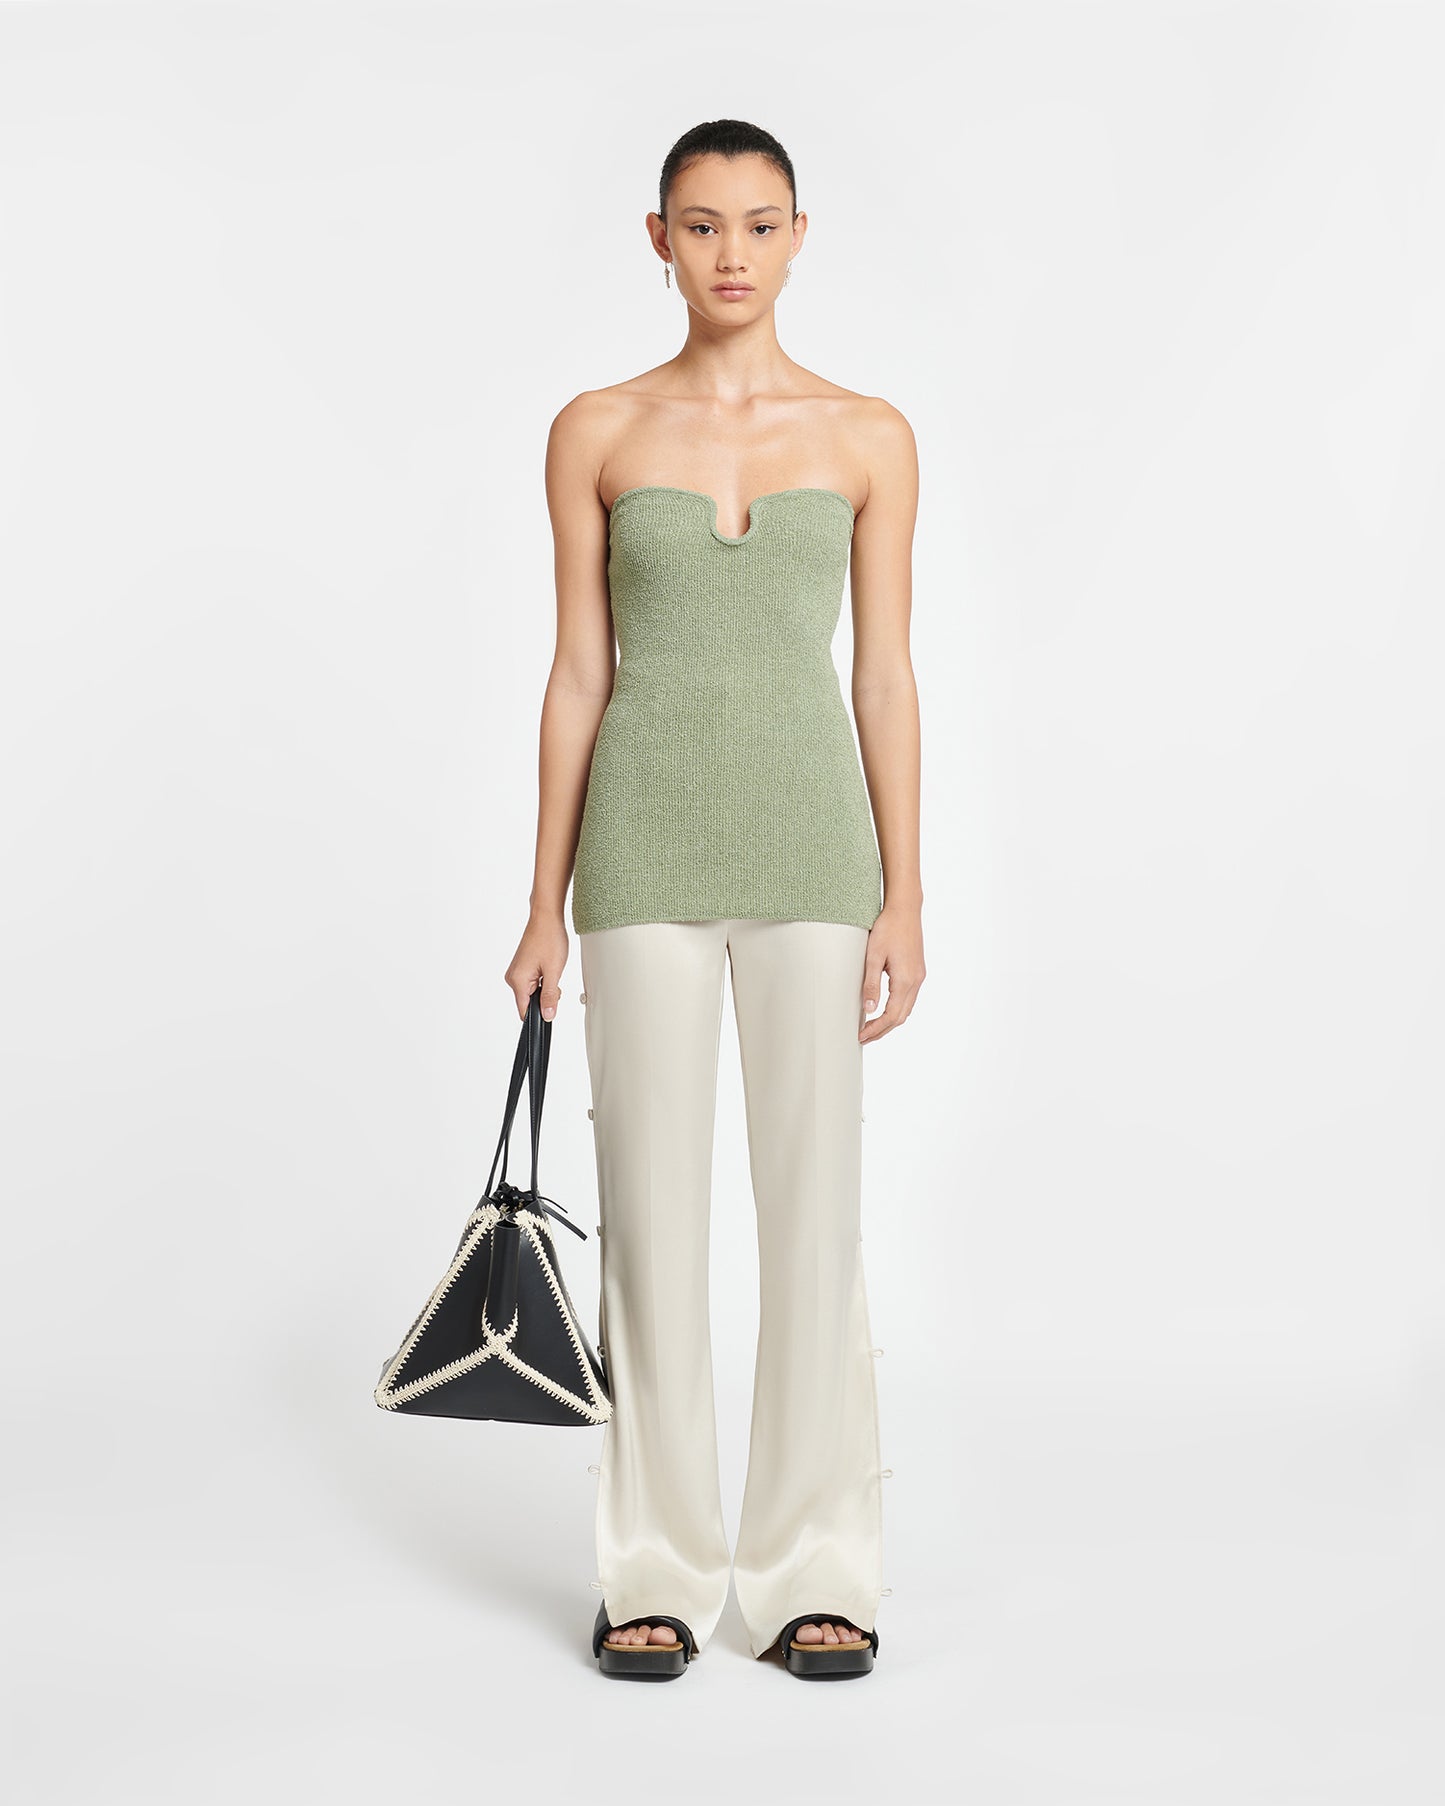 Zessa - Terry-Knit Bandeau Top - Faded Sage